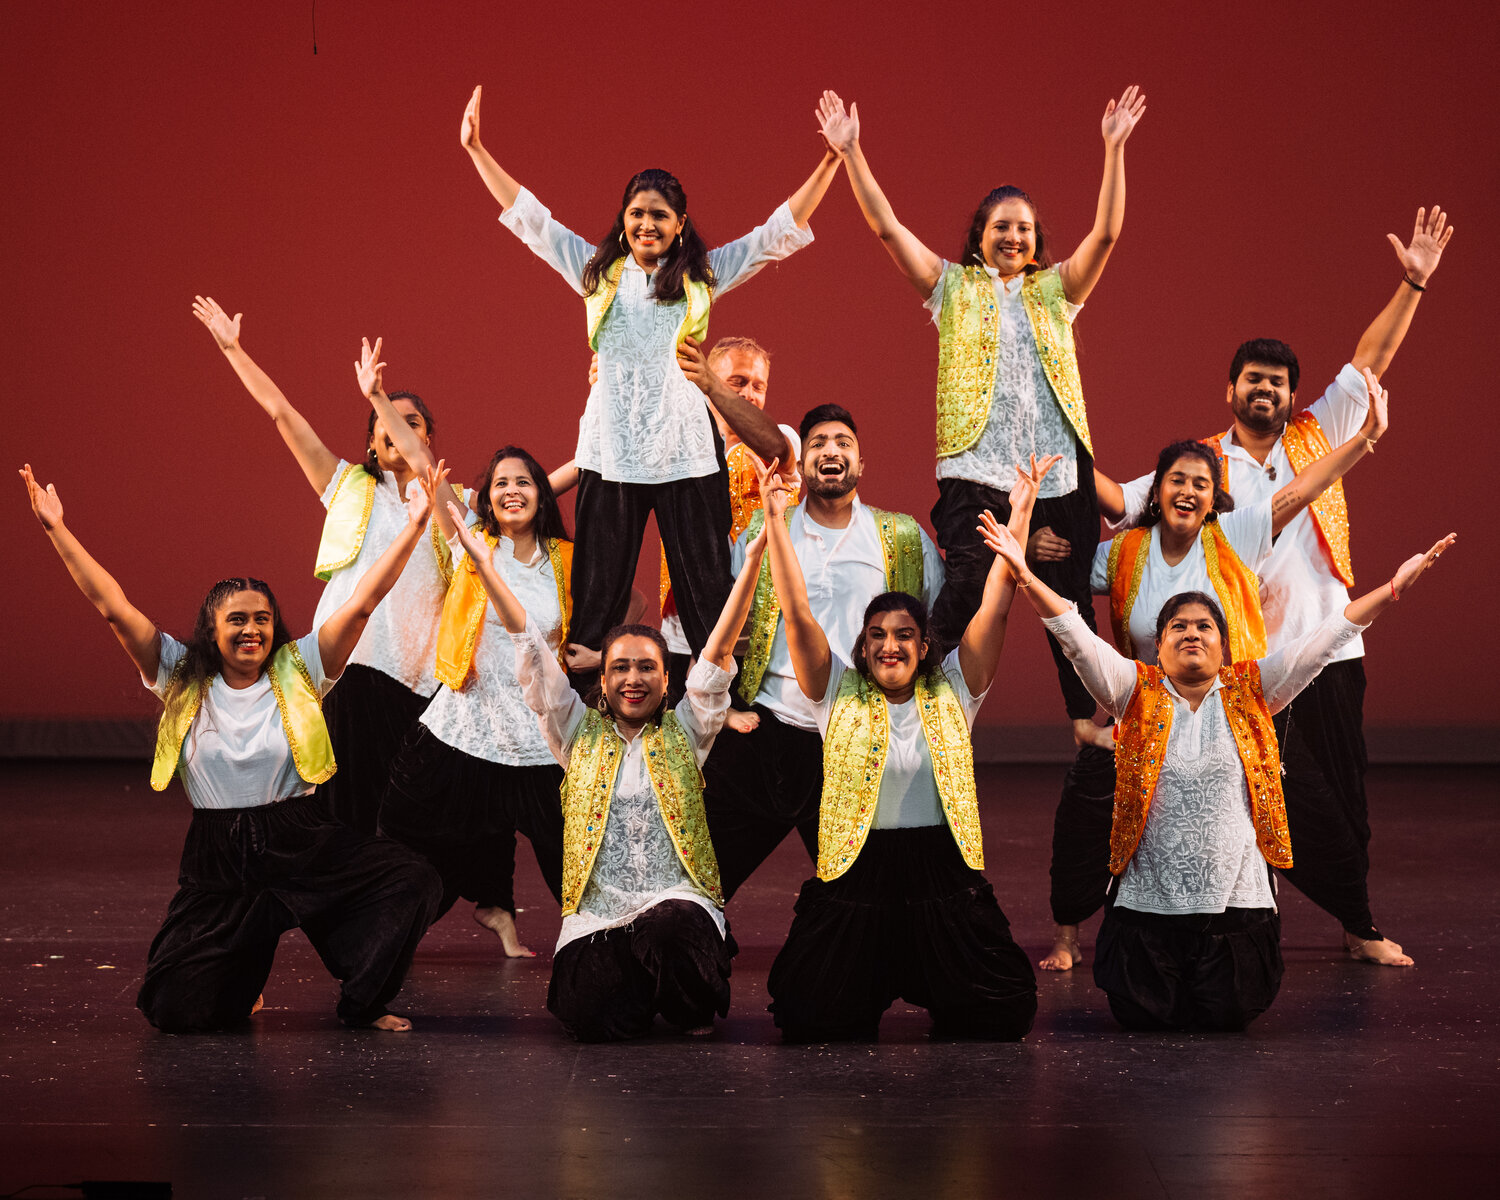 Over 70 cast members perform in "Acceptance, Kindness, Support" at the Cowles Center as part of a production by the South Asian Arts & Theater House. (Photos submitted)